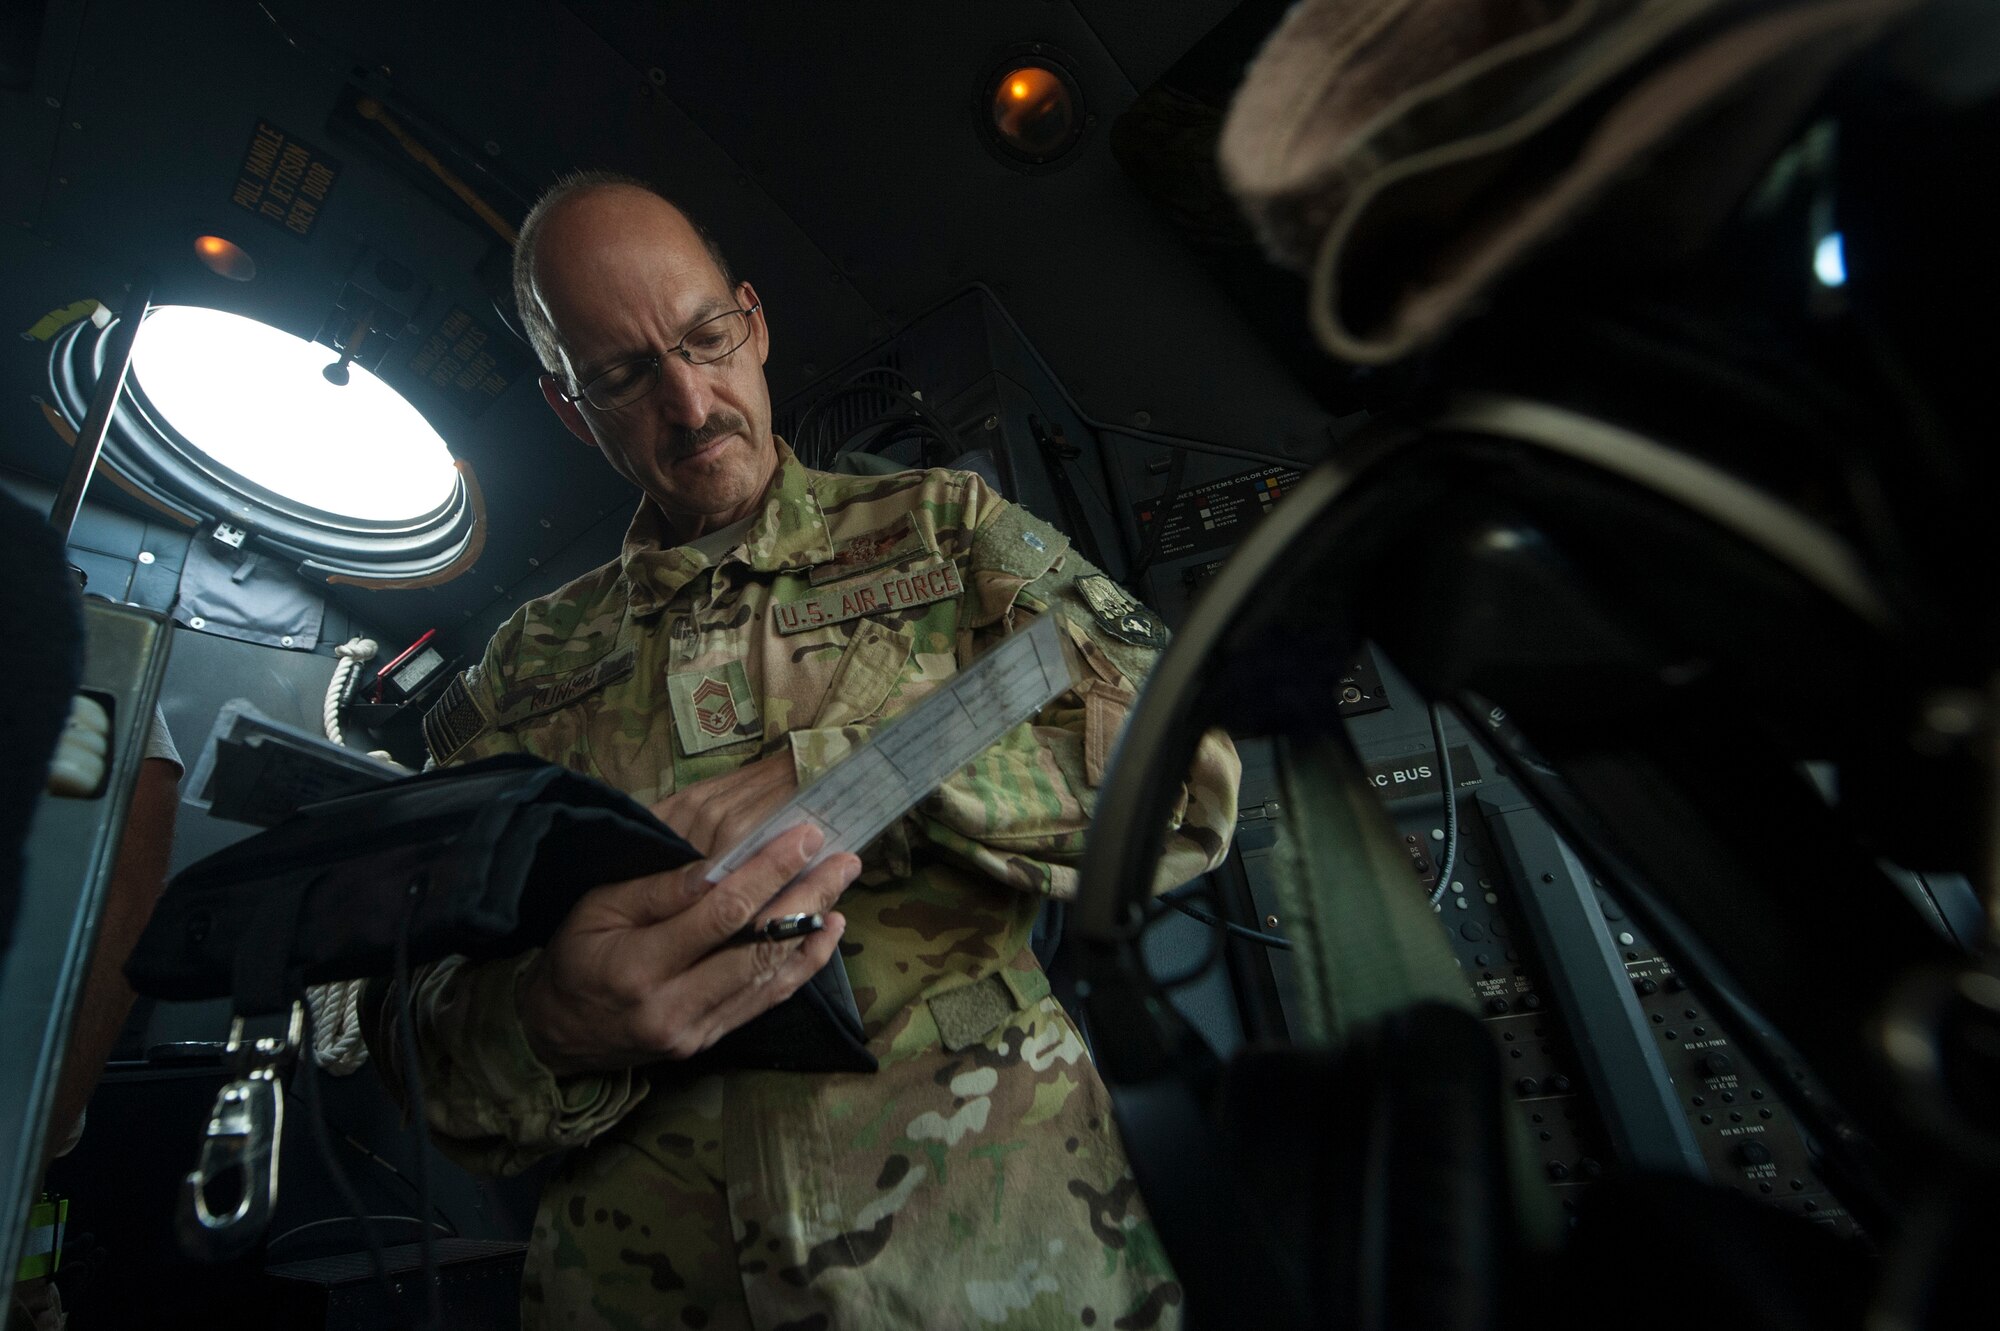 U.S. Air Force Reserve Chief Master Sgt. Kenneth Kunkel, 746th Expeditionary Airlift Squadron C-130 Hercules flight engineer, processes paperwork for a C-130 Hercules pre-flight inspection Nov. 13, 2018, at Al Udeid Air Base, Qatar. Kunkel reached 10,000 flying hours Oct. 6, 2018, a number considered prestigious amongst military aviators. (U.S. Air Force photo by Tech. Sgt. Christopher Hubenthal)